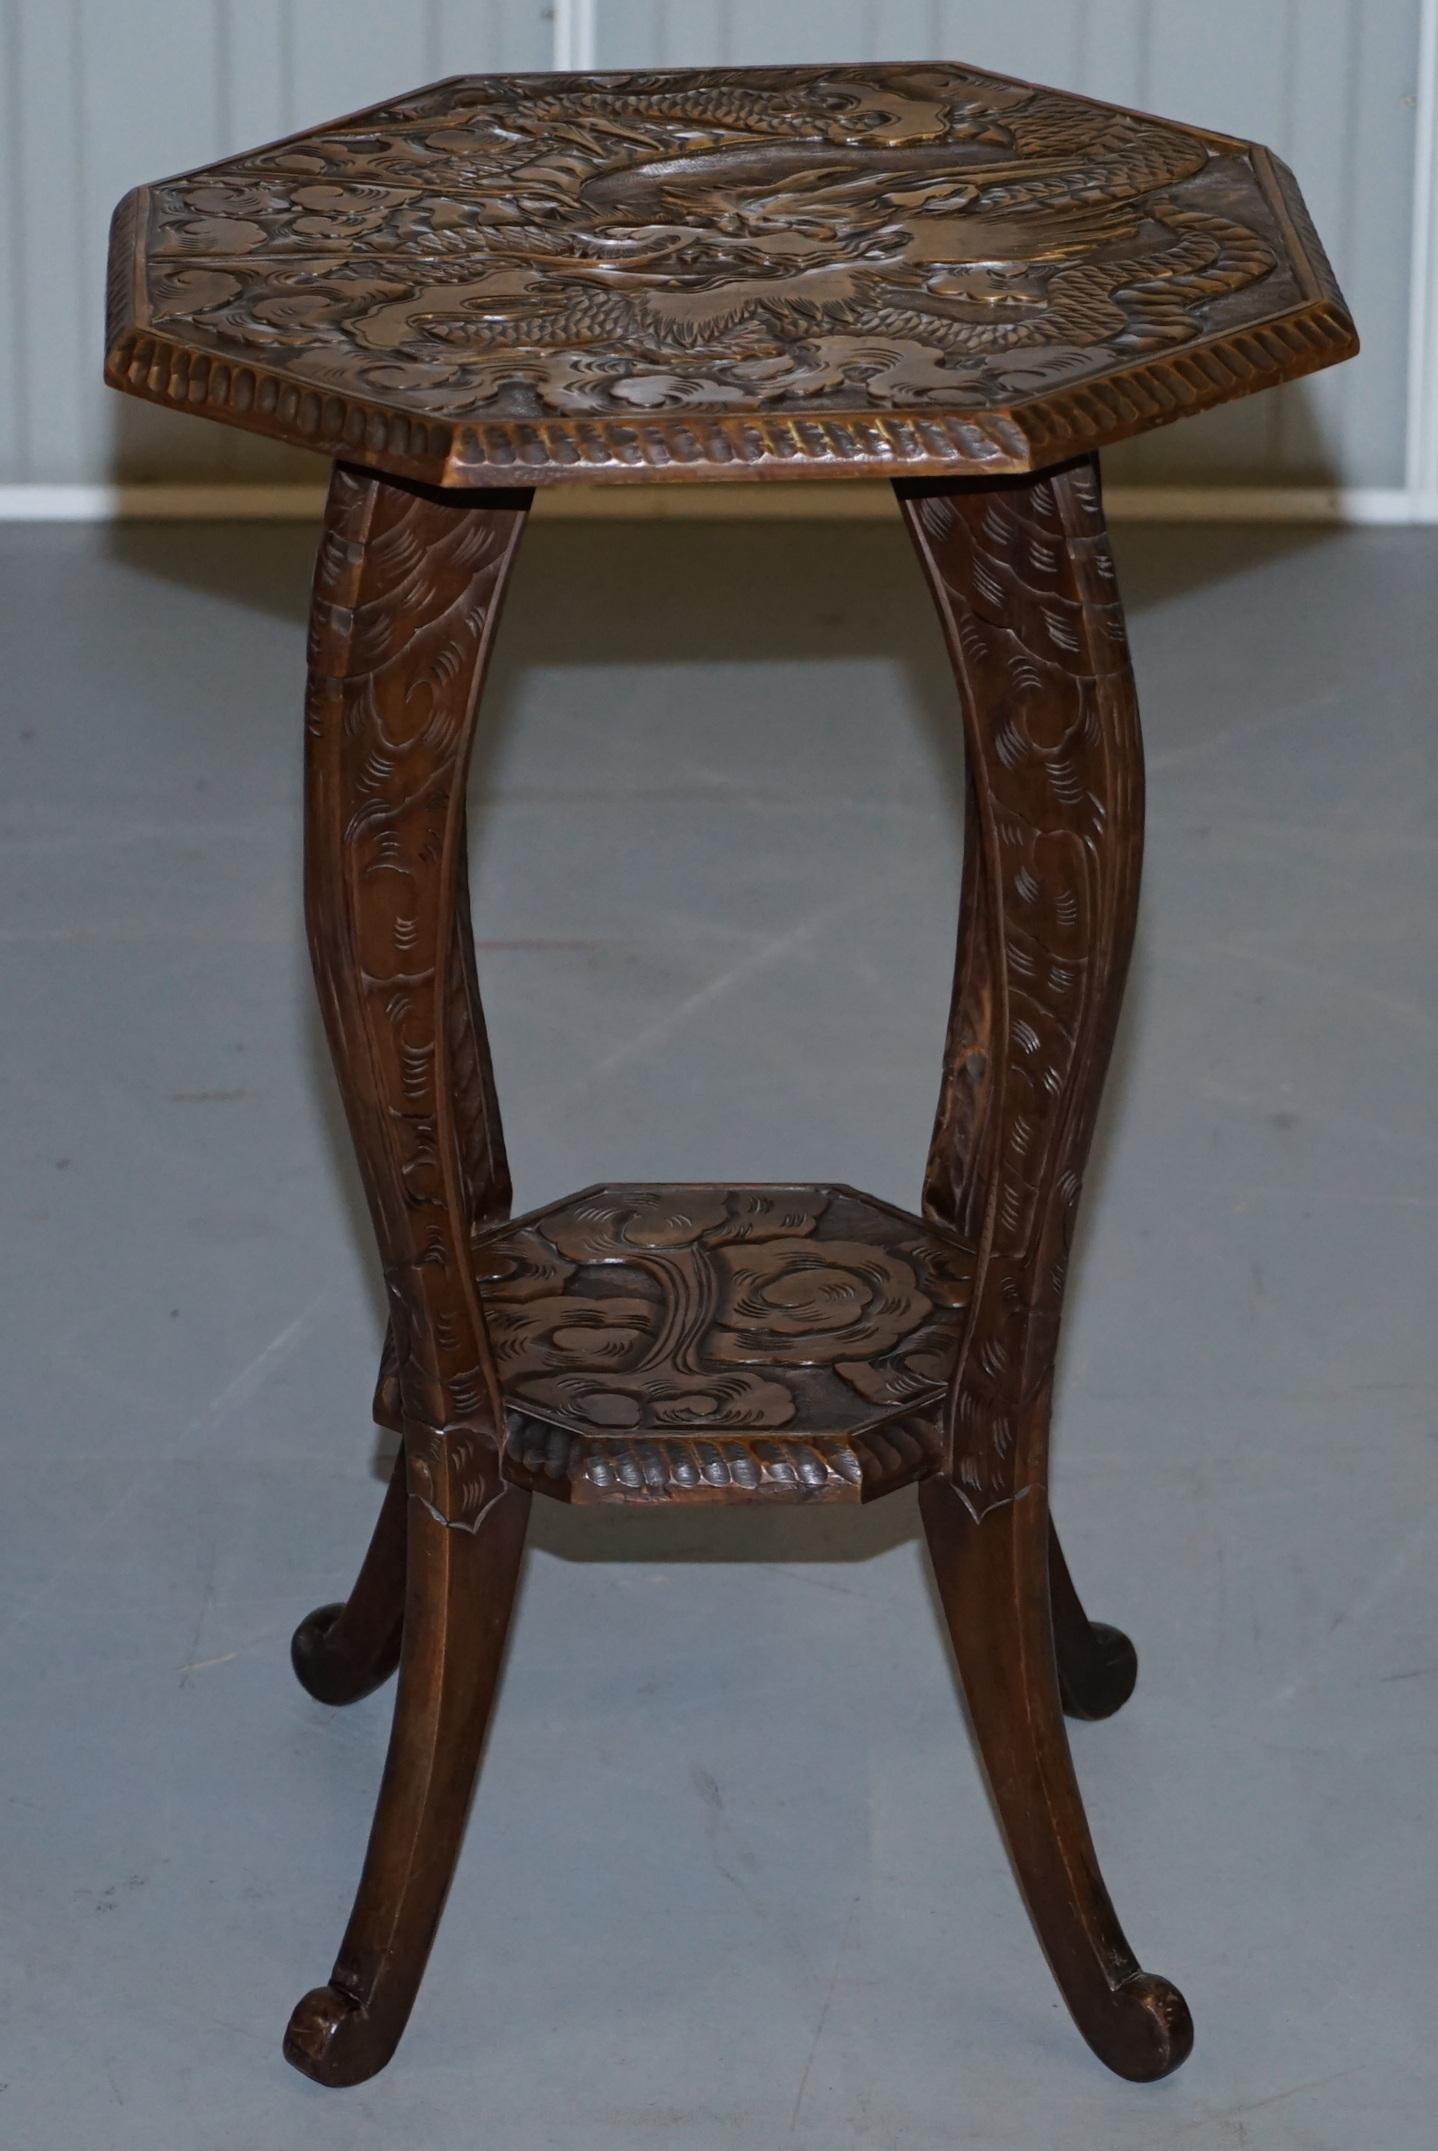 We are delighted to offer for sale this lovely rare Liberty’s London 1905 Japanese dragon mahogany side table

A good looking piece, its hand carved from top to bottom with floral detailing and a large ornate dragon to the top

We have deep